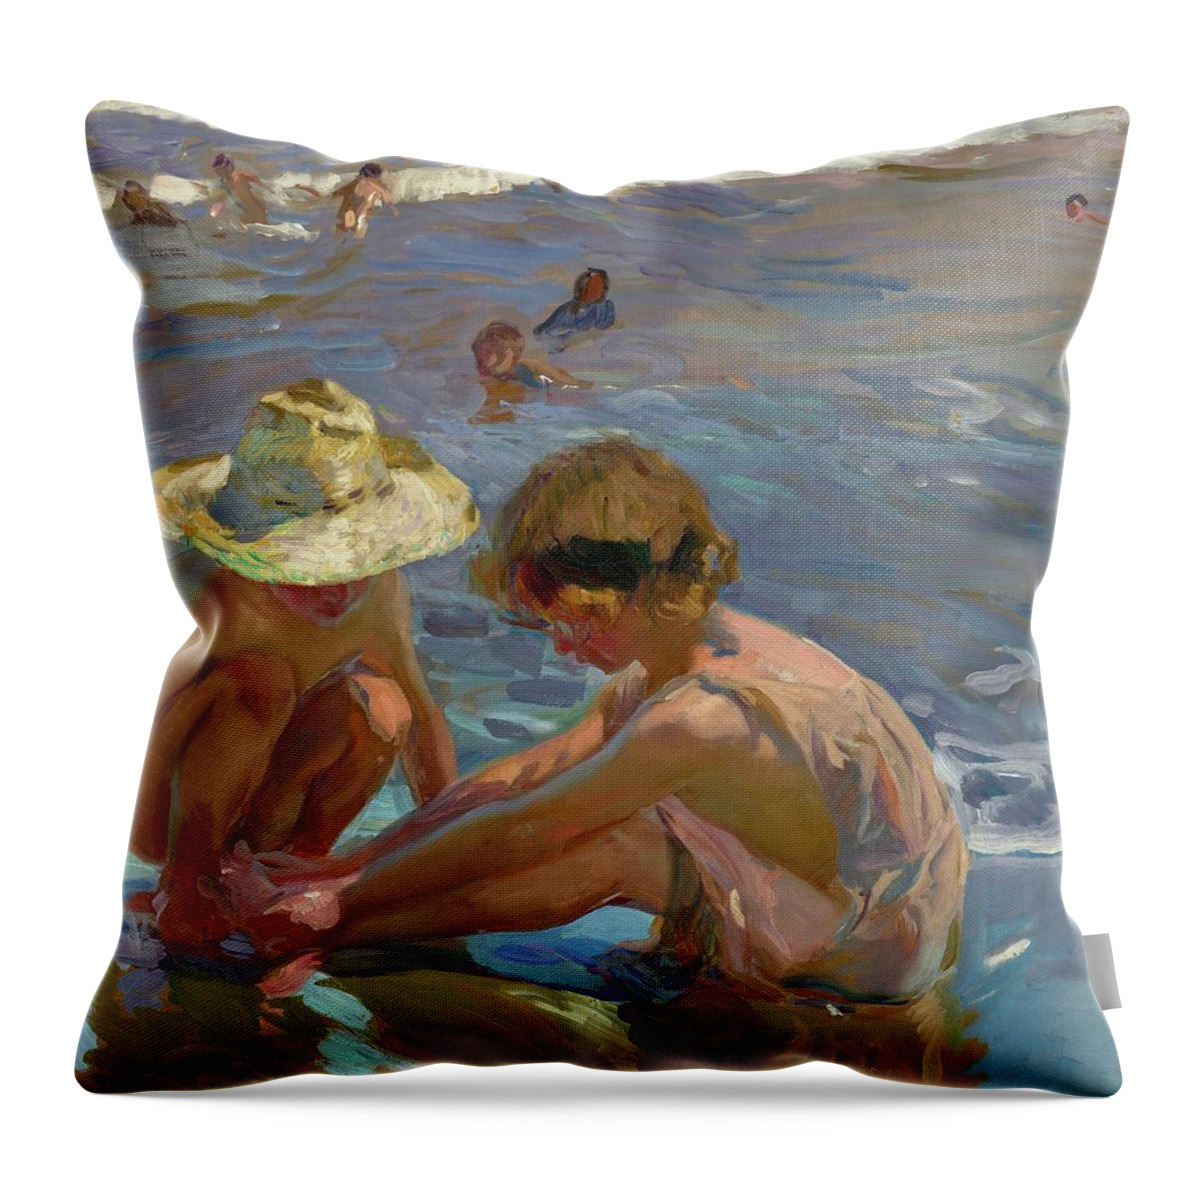 People Throw Pillow featuring the painting The Wounded Foot by Joaquin Sorolla